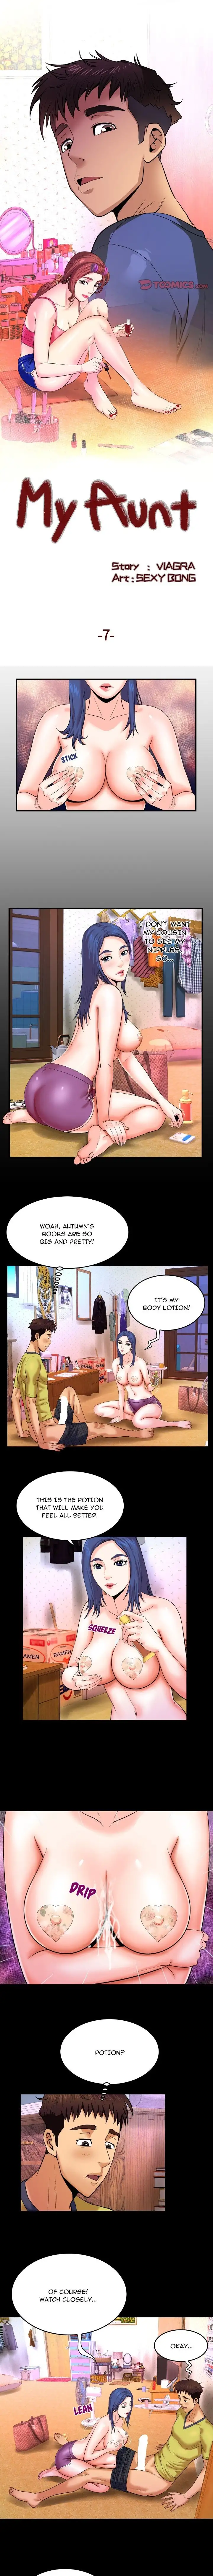 My Aunt - Chapter 7 Page 1